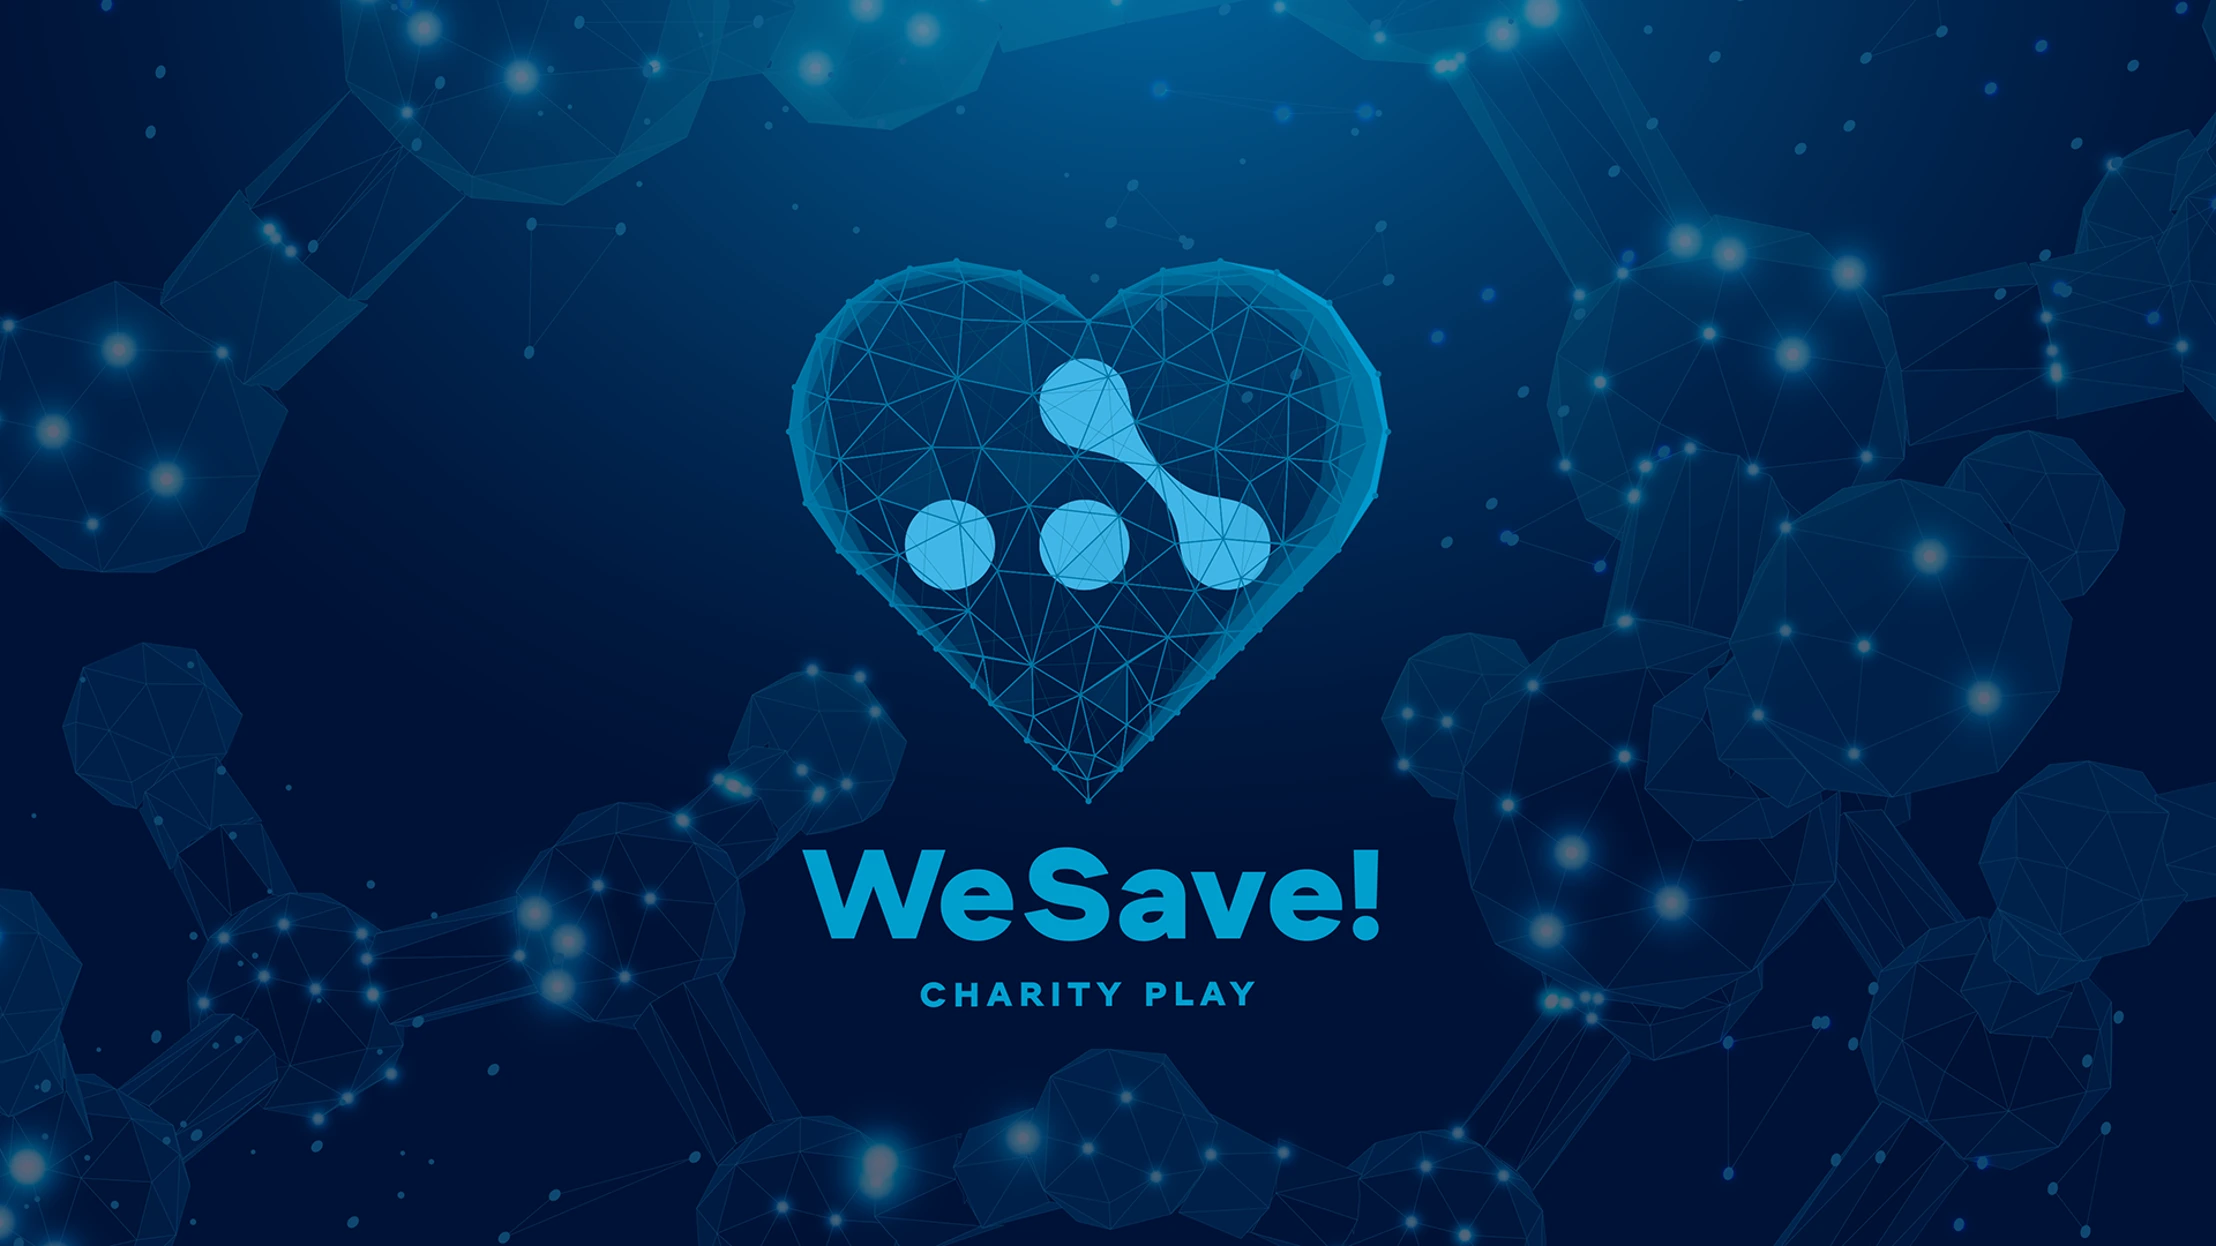 WeSave! Charity Play — how to donate